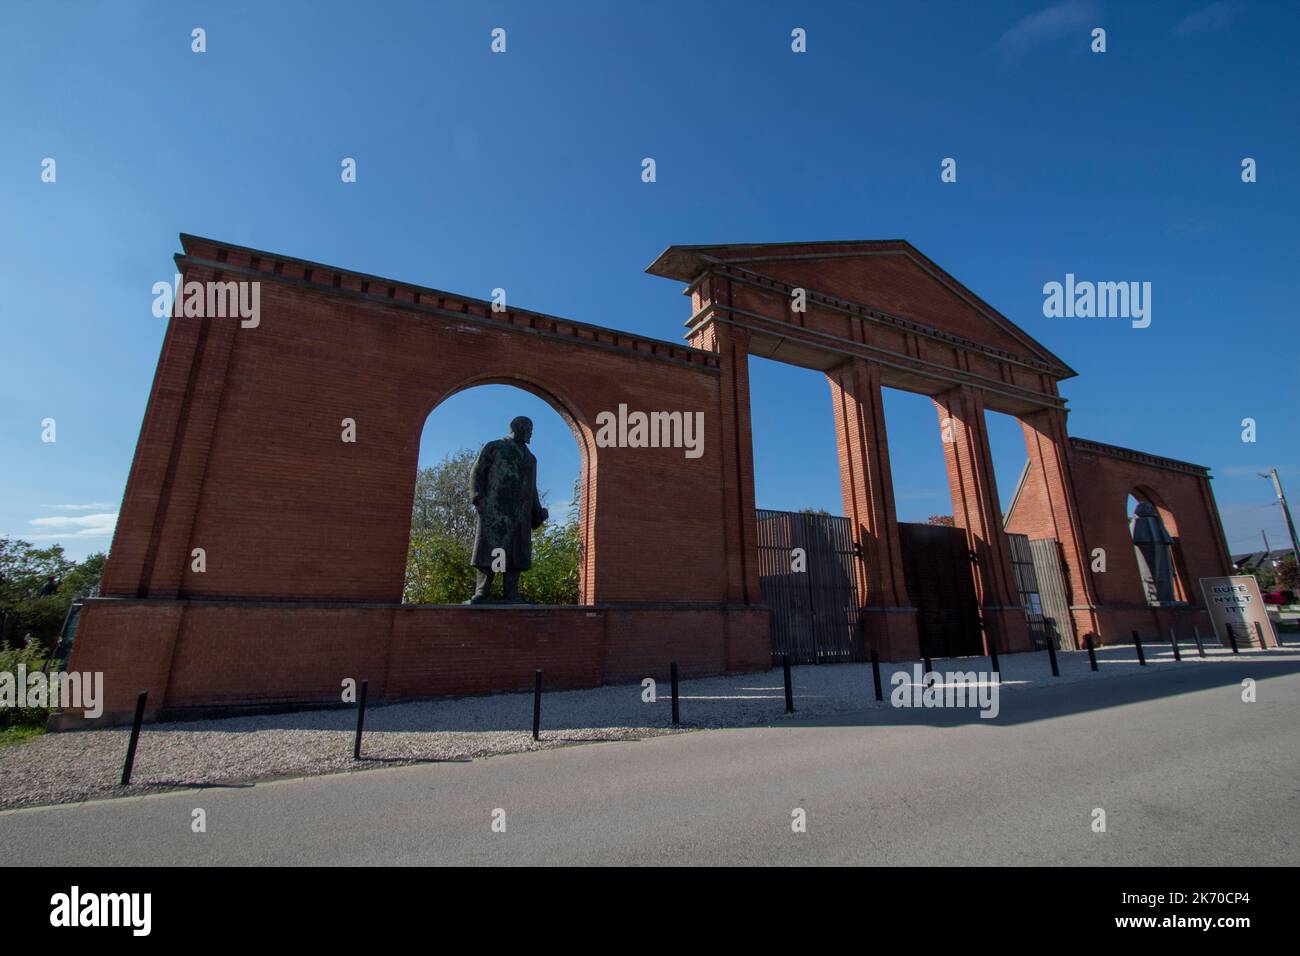 The entrance to Memento Park an open-air museum dedicated to monumental statues from Hungary's Communist period, Budapest, Hungary, Stock Photo